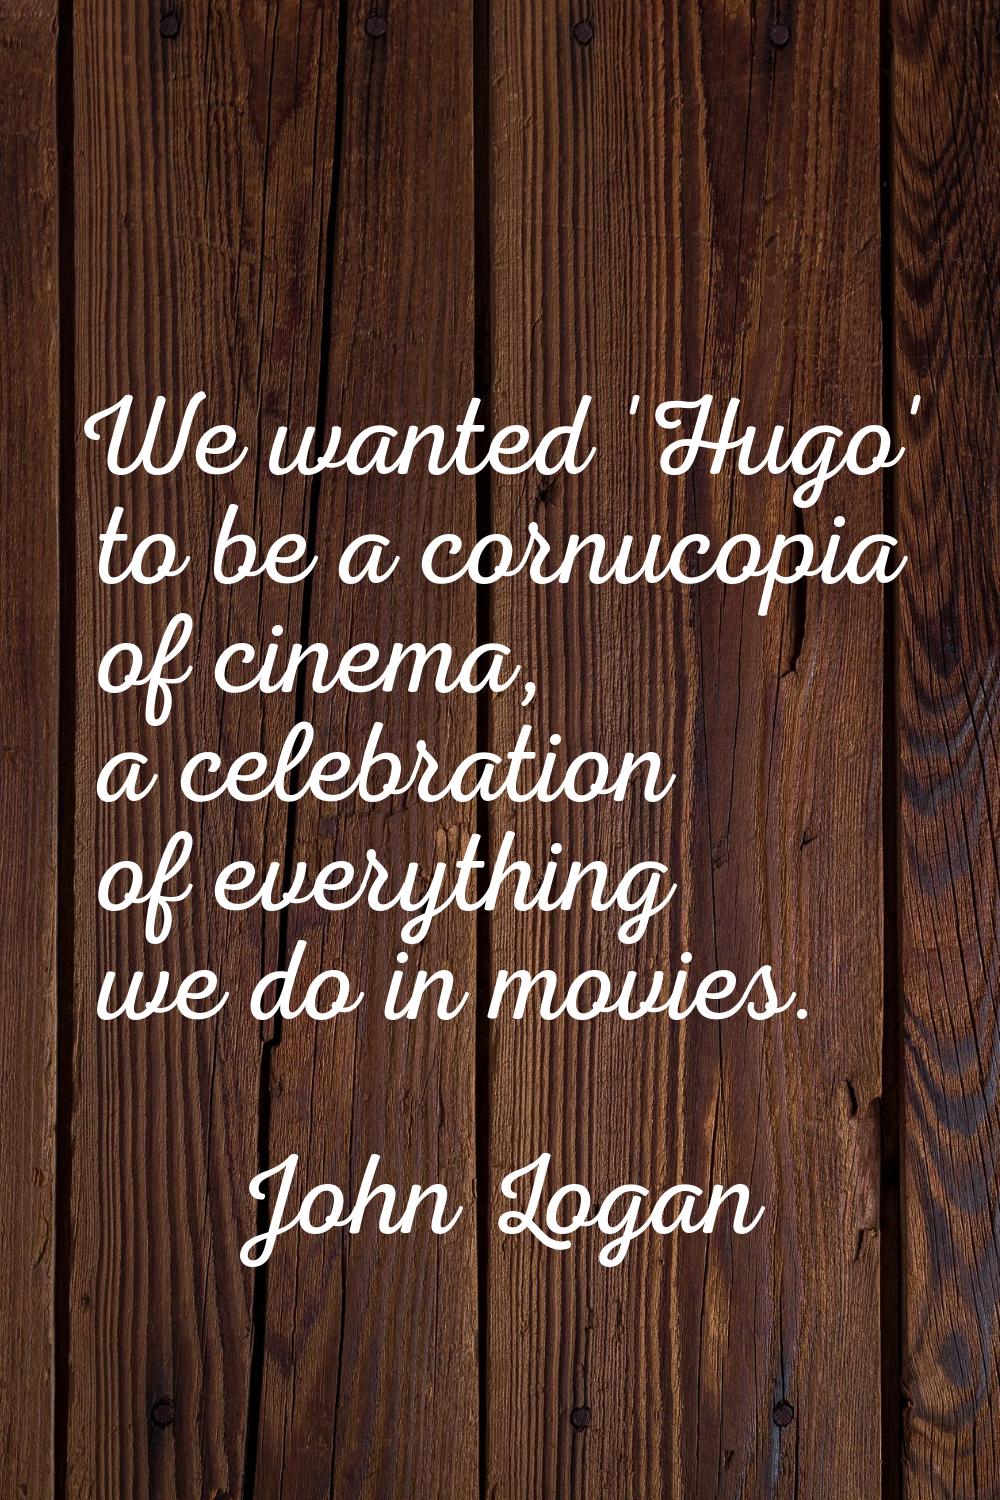 We wanted 'Hugo' to be a cornucopia of cinema, a celebration of everything we do in movies.